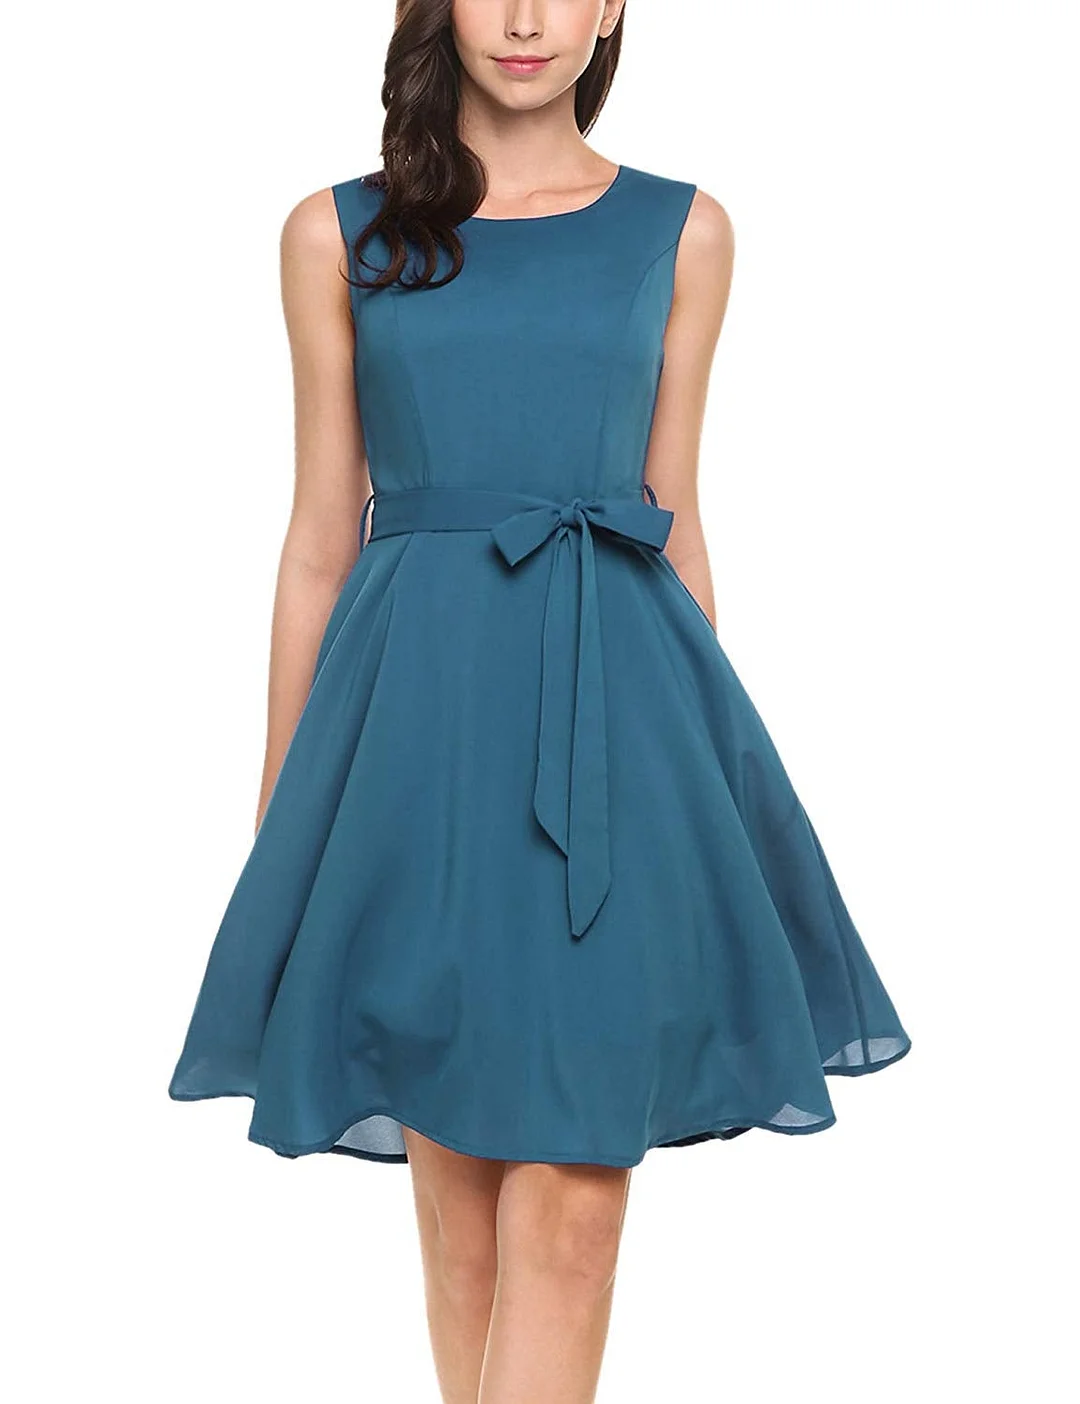 Women Chiffon Summer Sleeveless A-line Pleated Party Cocktail Dress with Belt